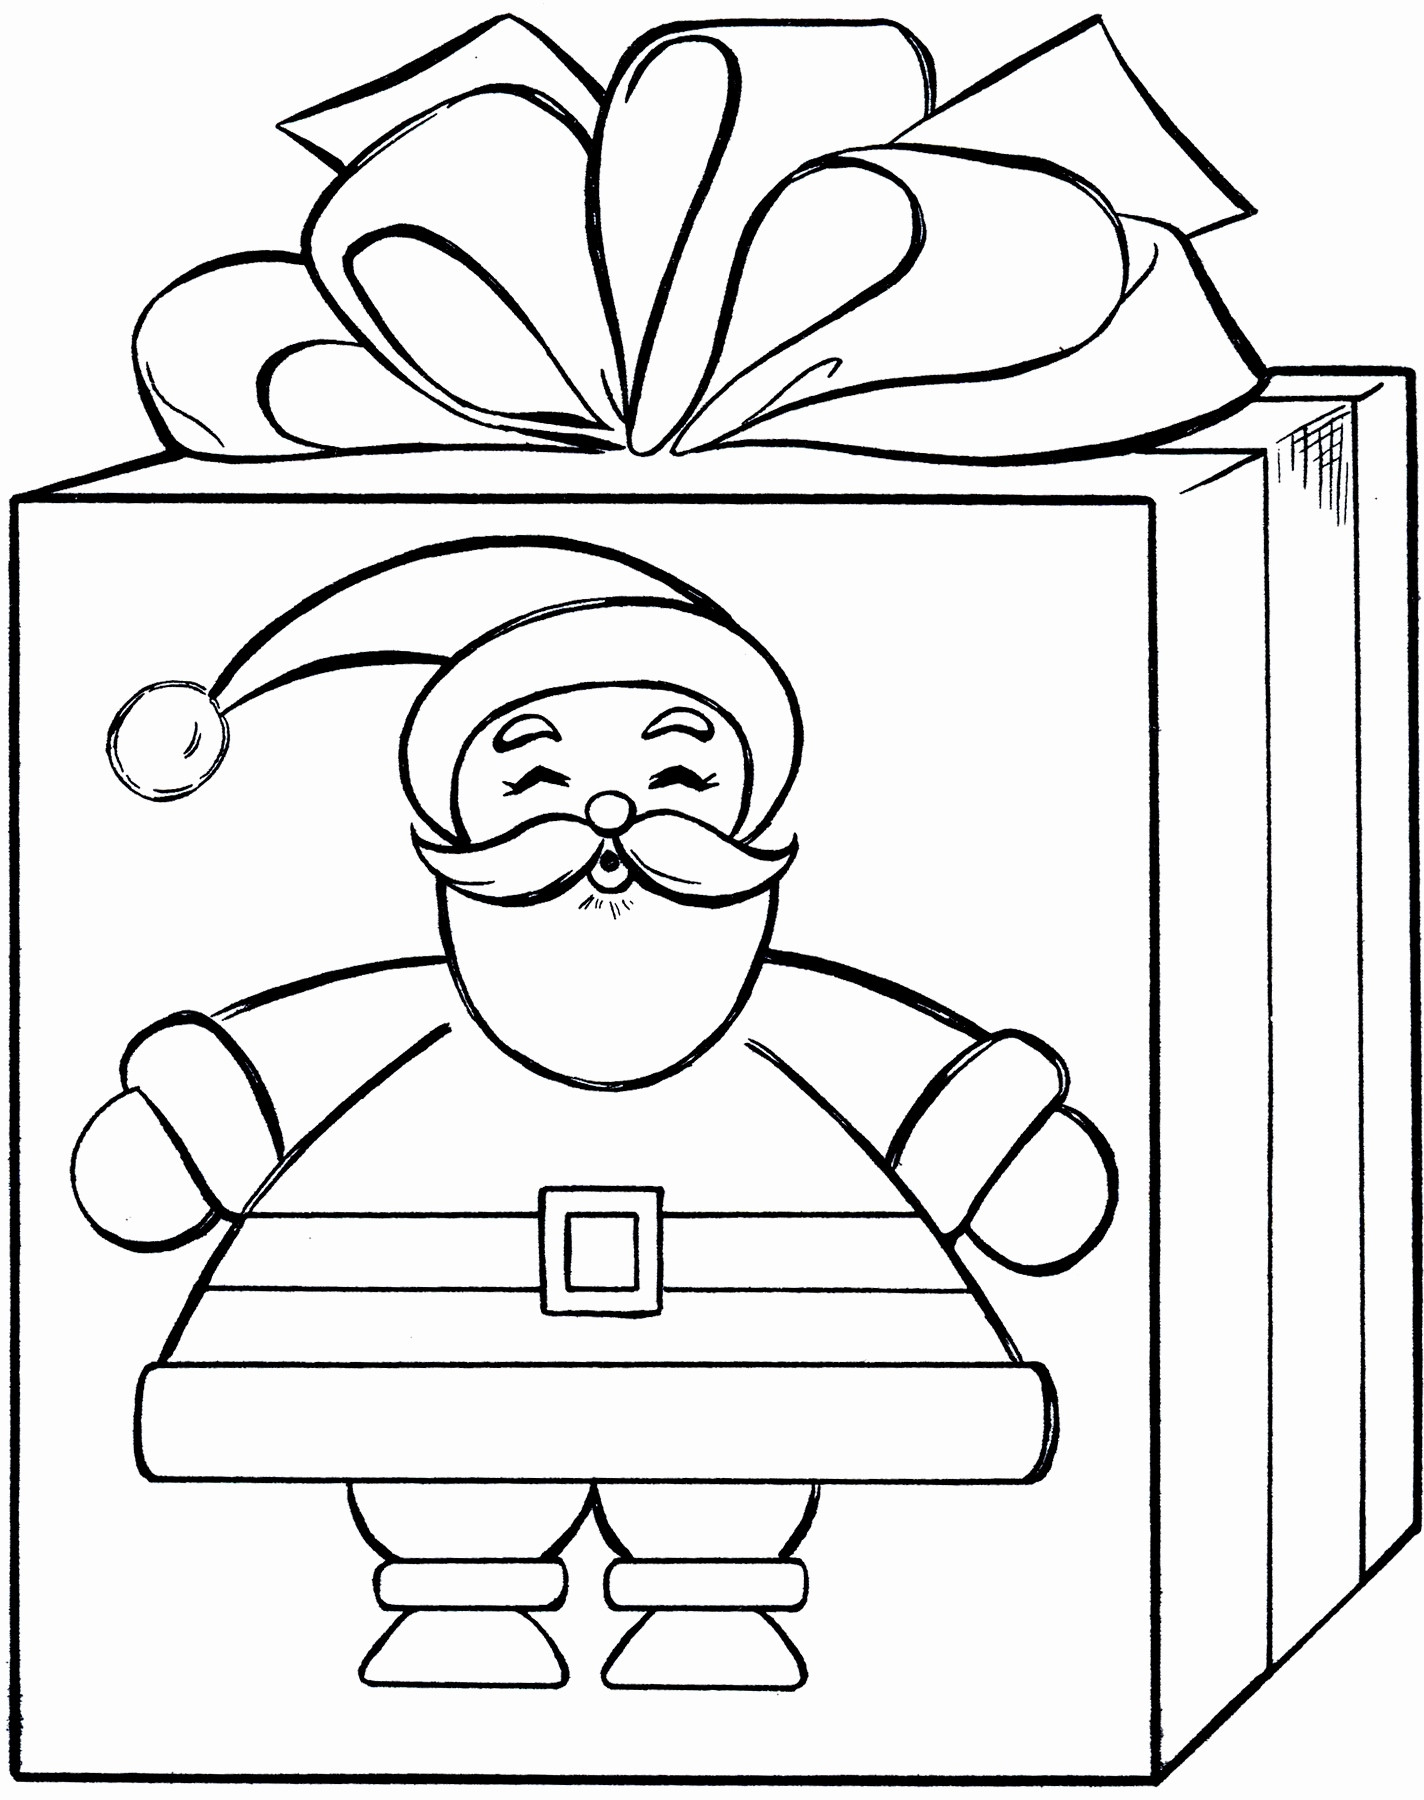 Christmas Elf Coloring Pages Christmas Elf Coloring Pages Awesome Present Page 3 7478 Of Within